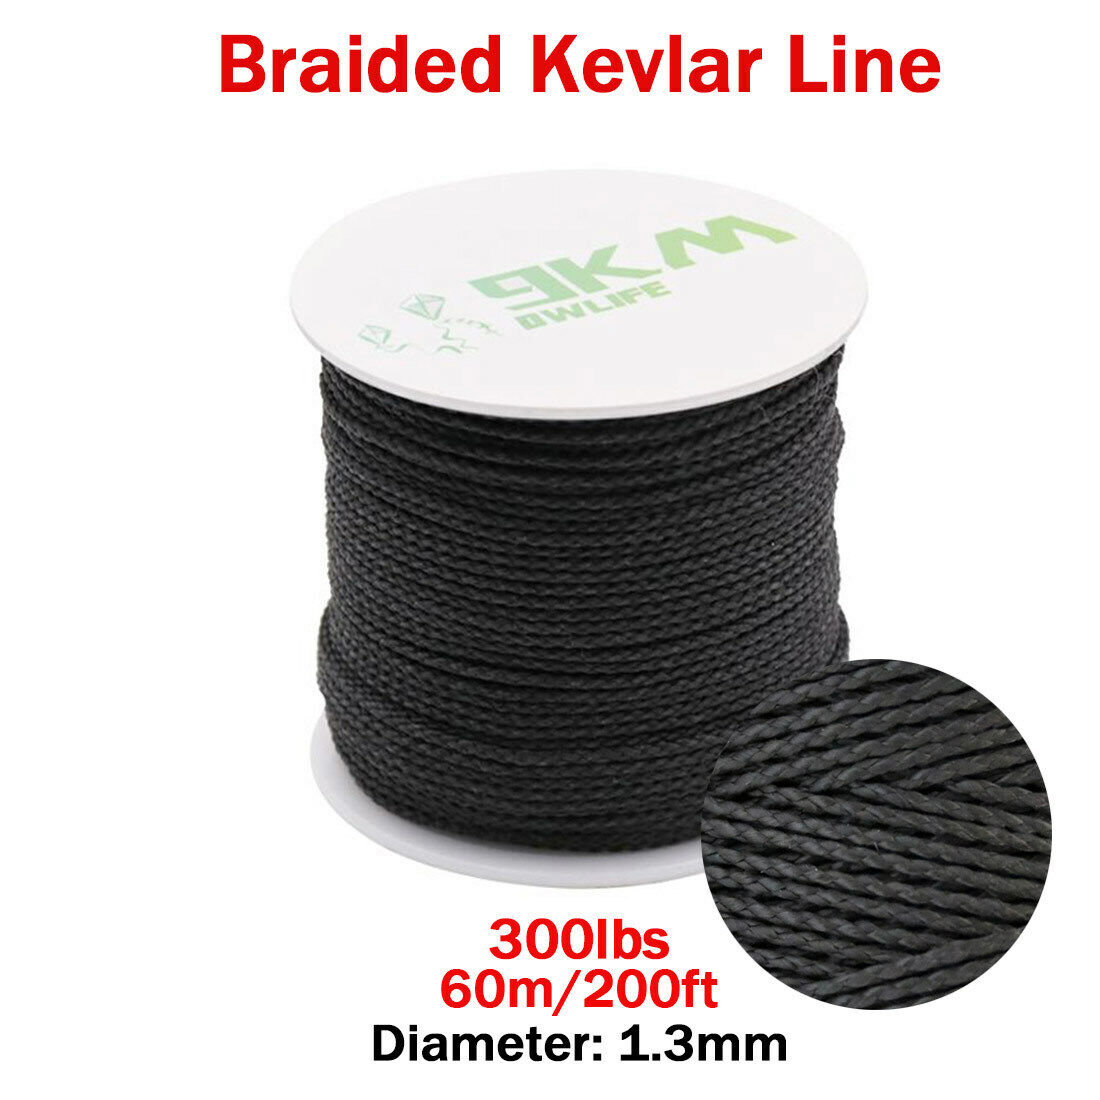 Black Braid Kevlar Line Utility Cord Paracord Camping Tactical made with  Kevlar